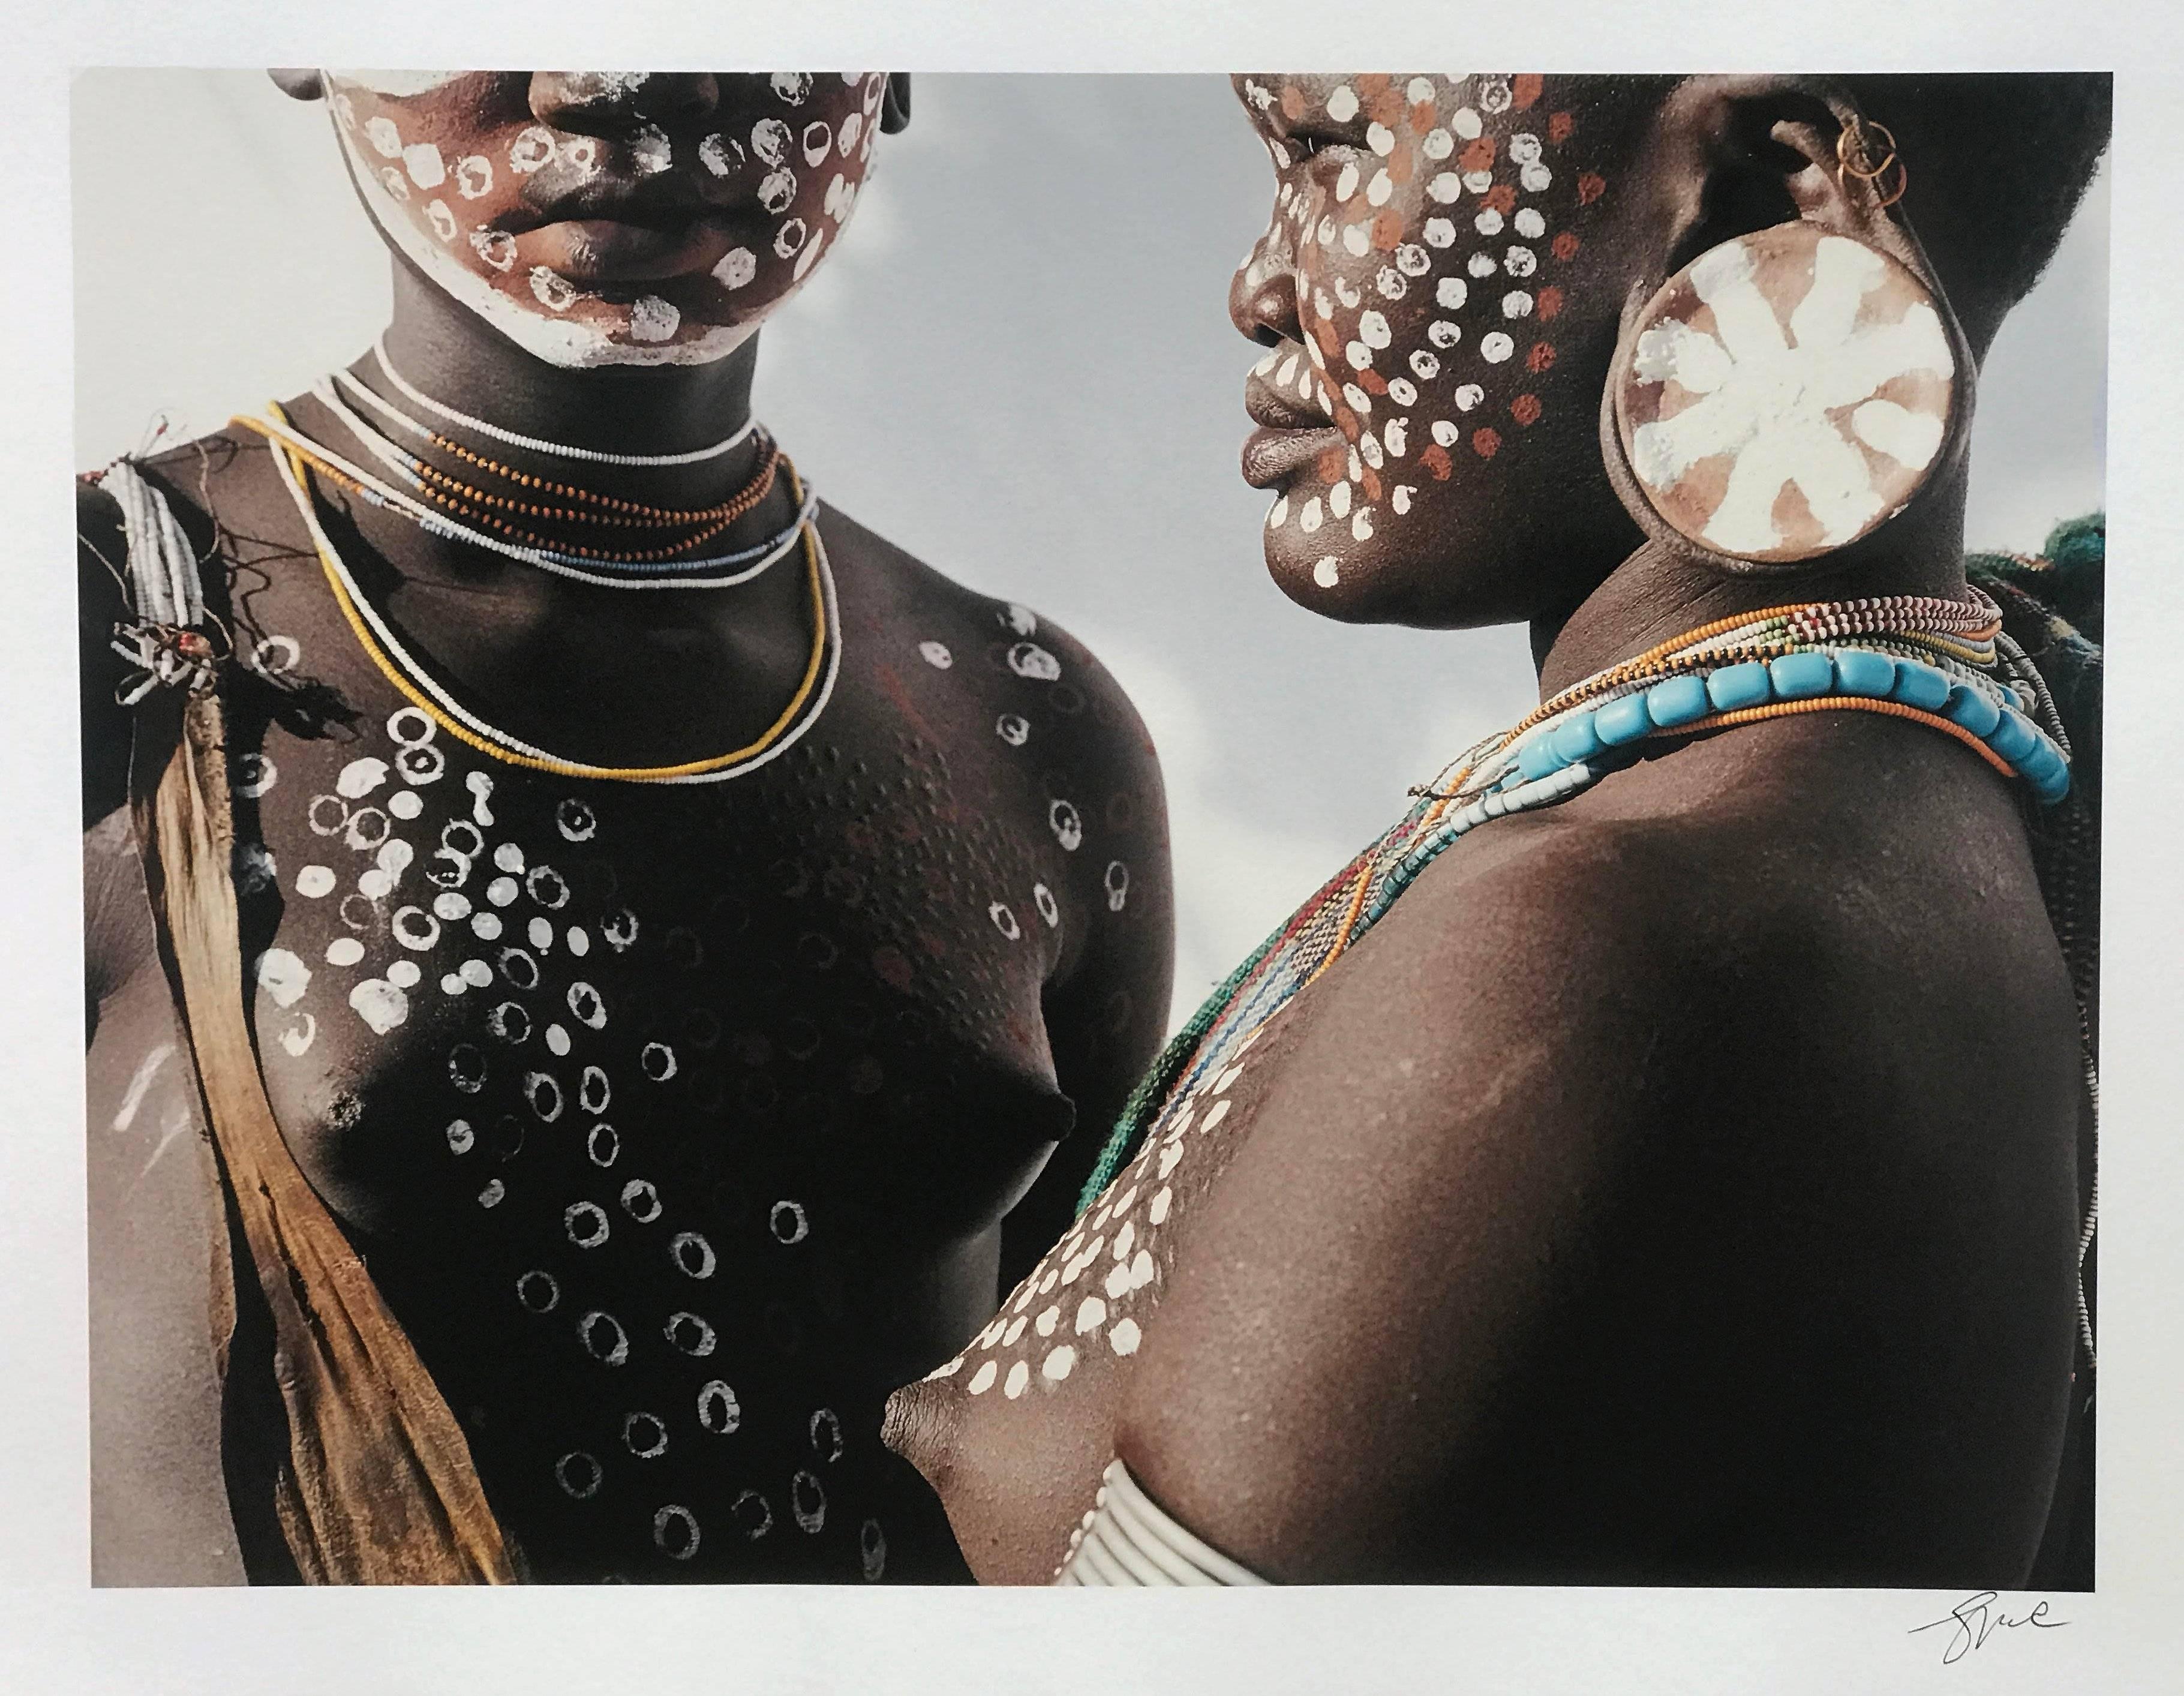 Two Sisters, Surma, Omo Valley, Ethiopia, Africa, 1996 by Jean-Michel (JM) Voge is an editioned archival pigment print, 1/5.  Signed, titled, dated on back of photo.

The artist is a former editorial photographer for magazines, such as Madame Figaro